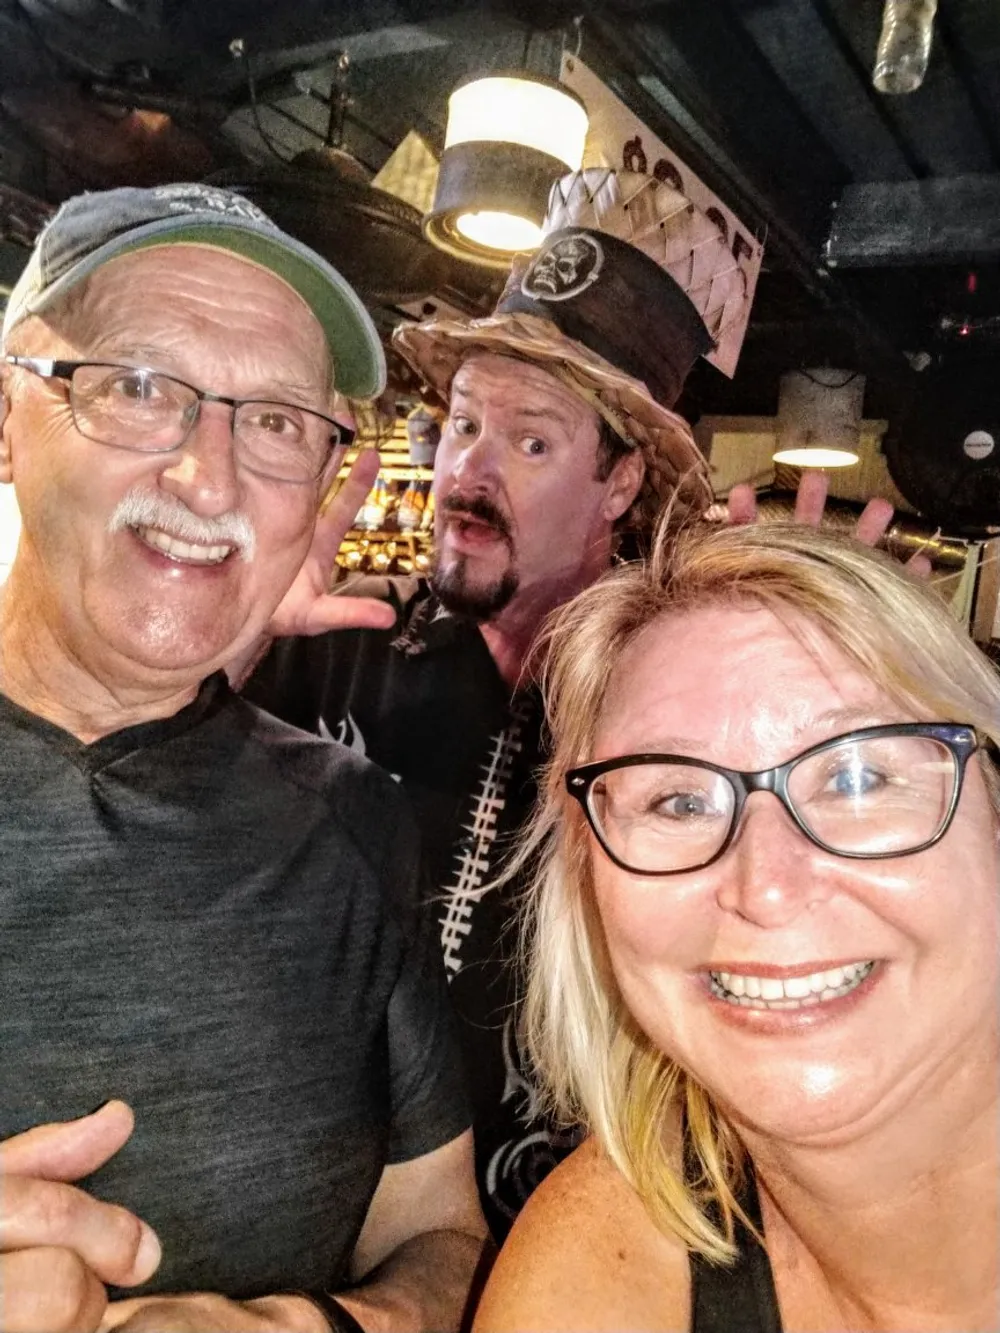 Three people are posing for a cheerful selfie with one person wearing a pirate hat and striking a playful pose in the background